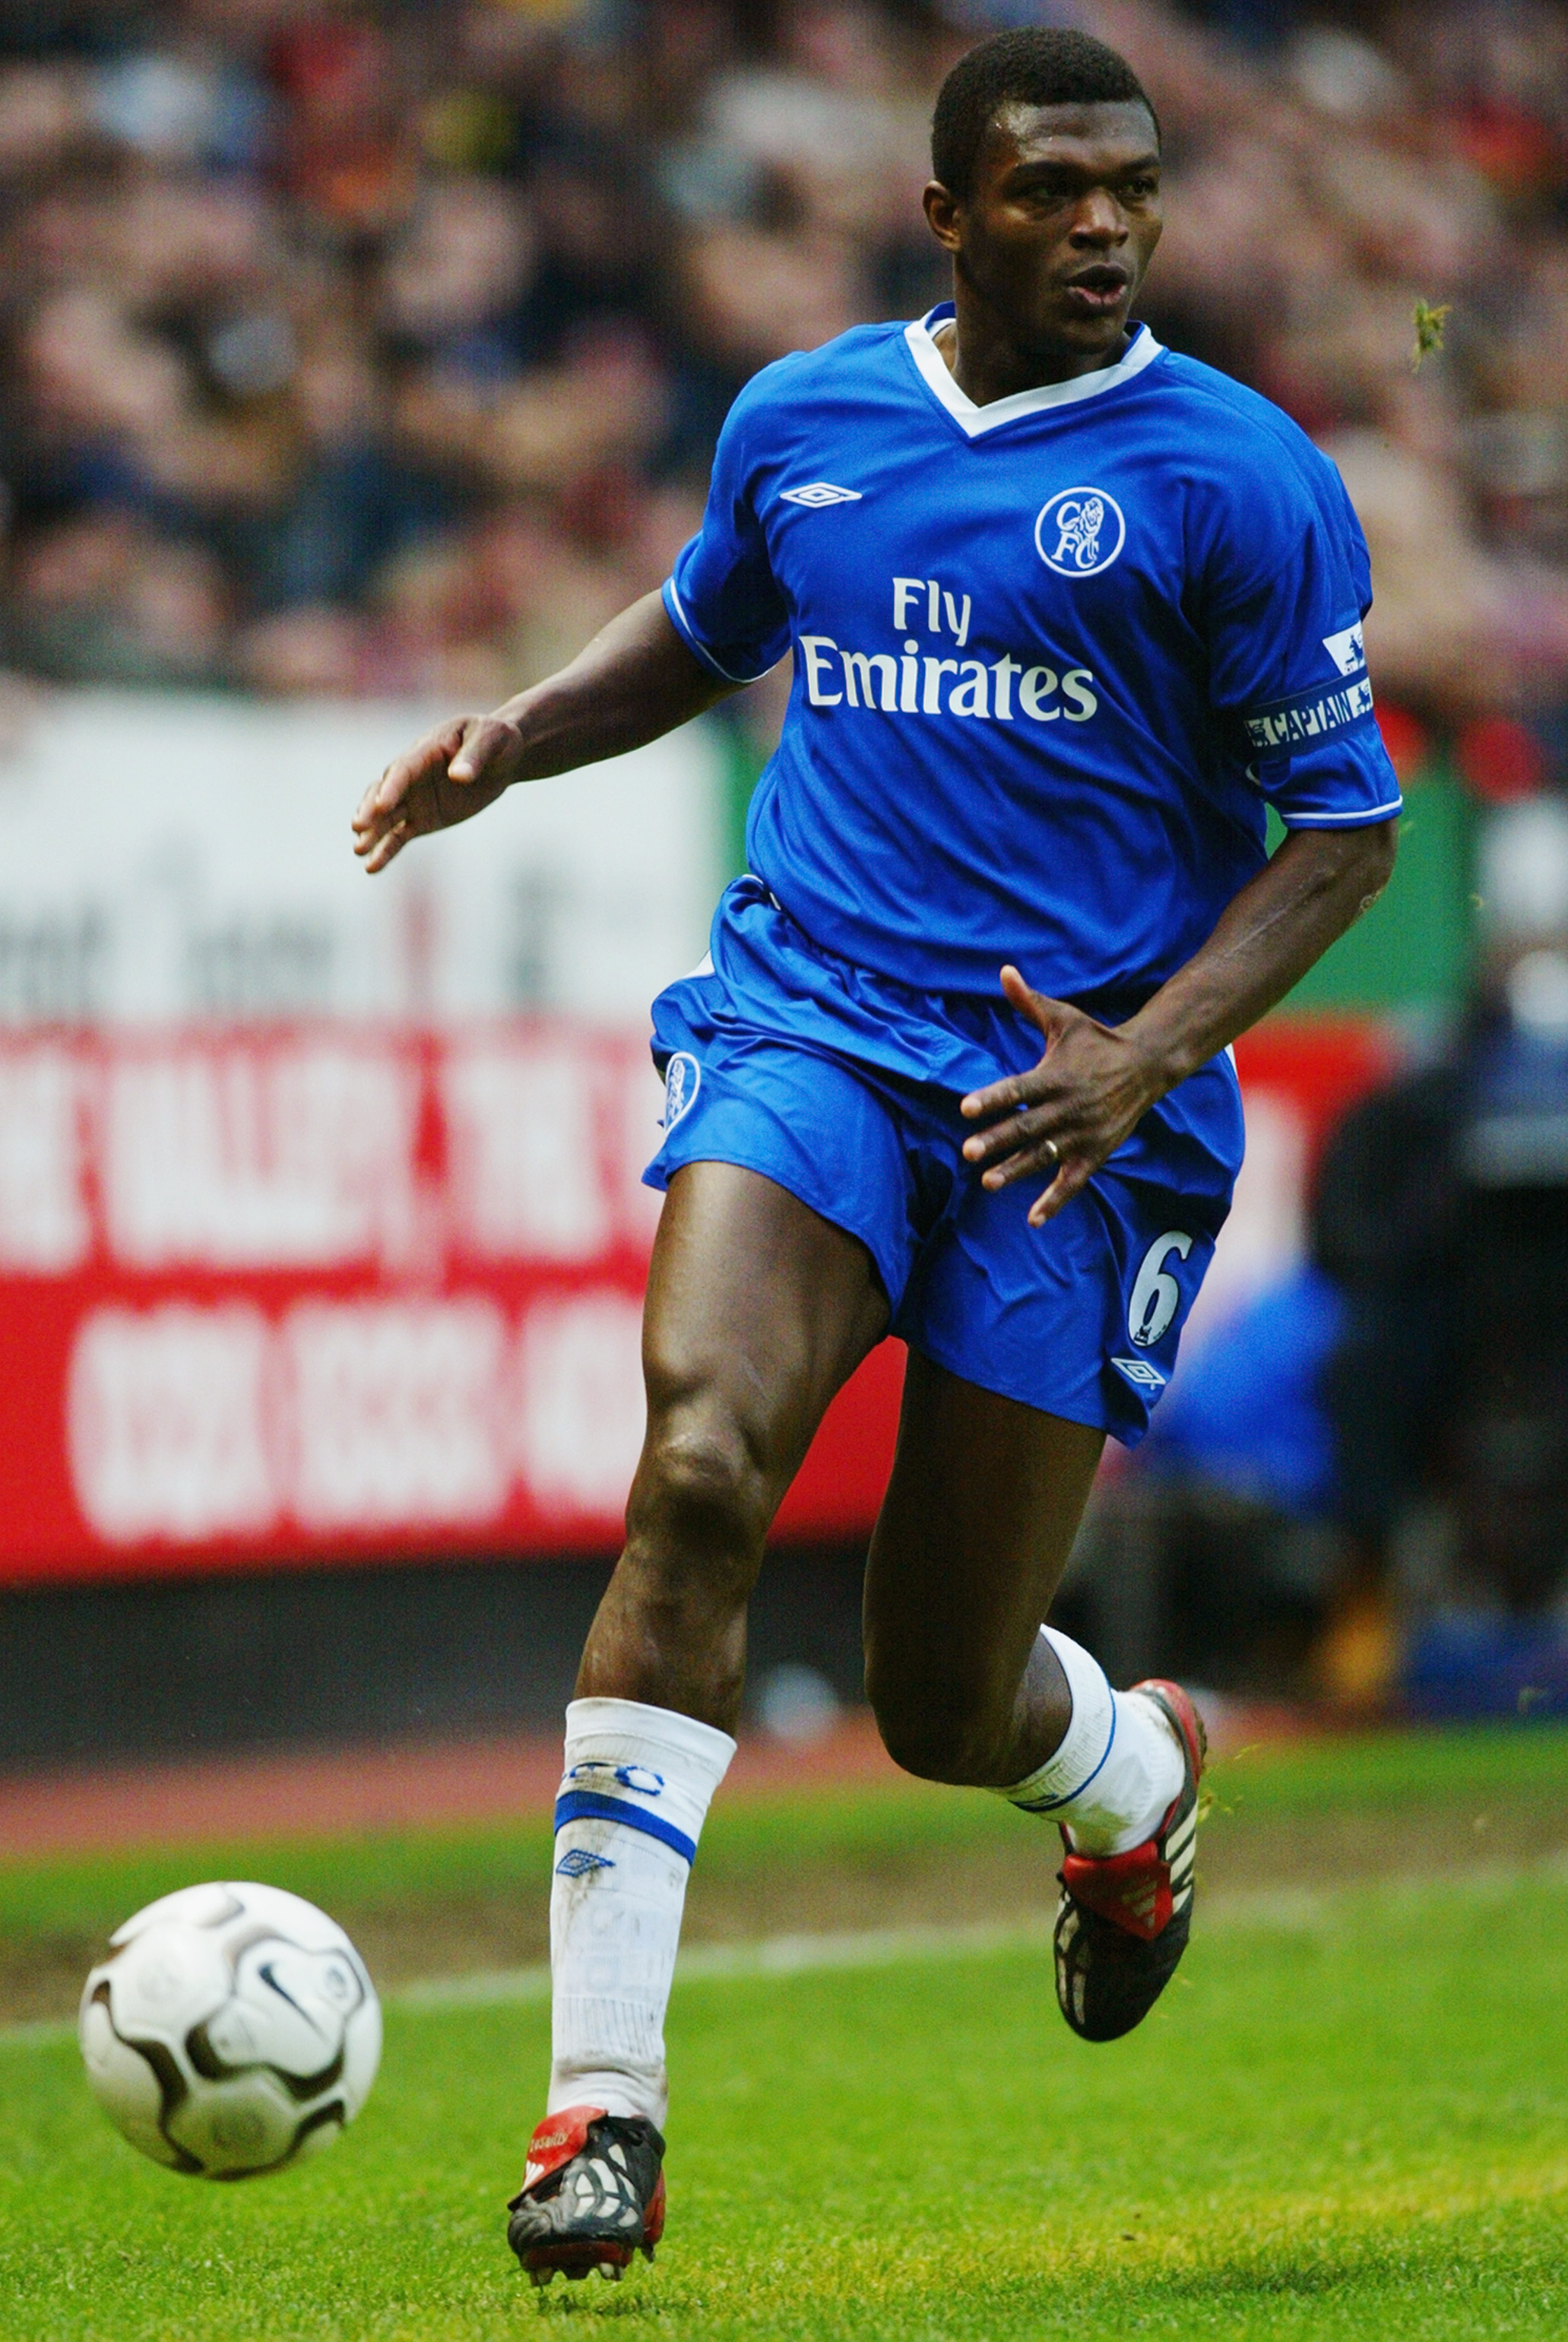 LONDON - DECEMBER 26:  Marcel Desailly of Chelsea running with the ball during the FA Barclaycard Premiership match between Charlton Athletic and Chelsea on December 26, 2003 at The Valley in London, England.  Charlton Athletic won the match 4-2.  (Photo